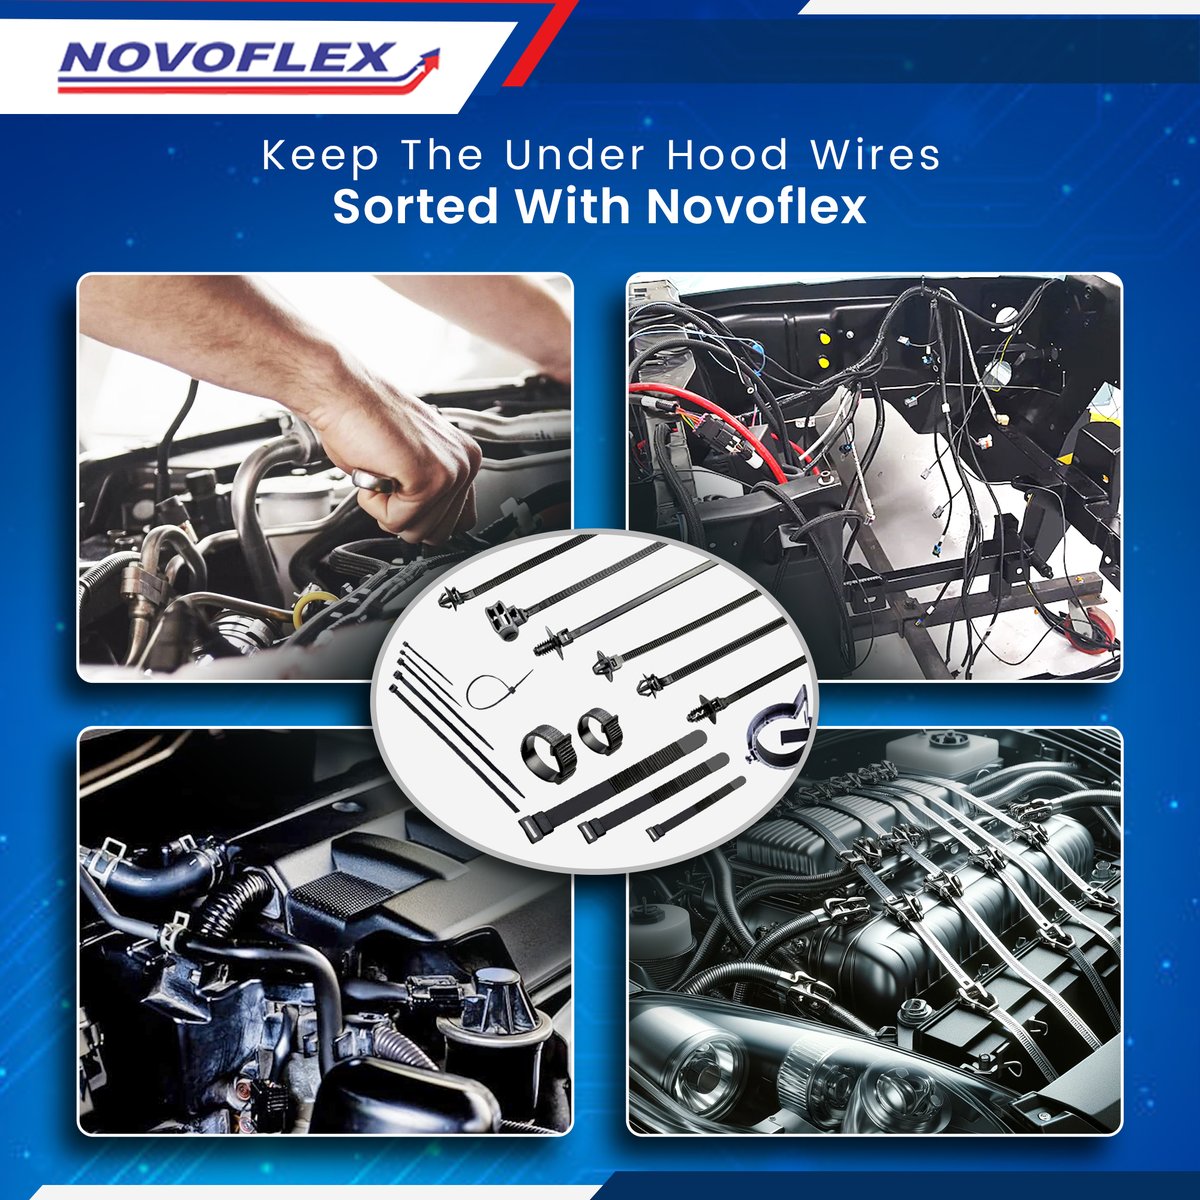 Novoflex presents the ultimate solution to keep the under hood wired sorted with high-performance Zip ties.
#novoflex #topcableties #cableties #industrialuse #costeffective #manufacturing #products #versatileproducts #novoflexineverysector #opengrommetrings #closedgrommetrings